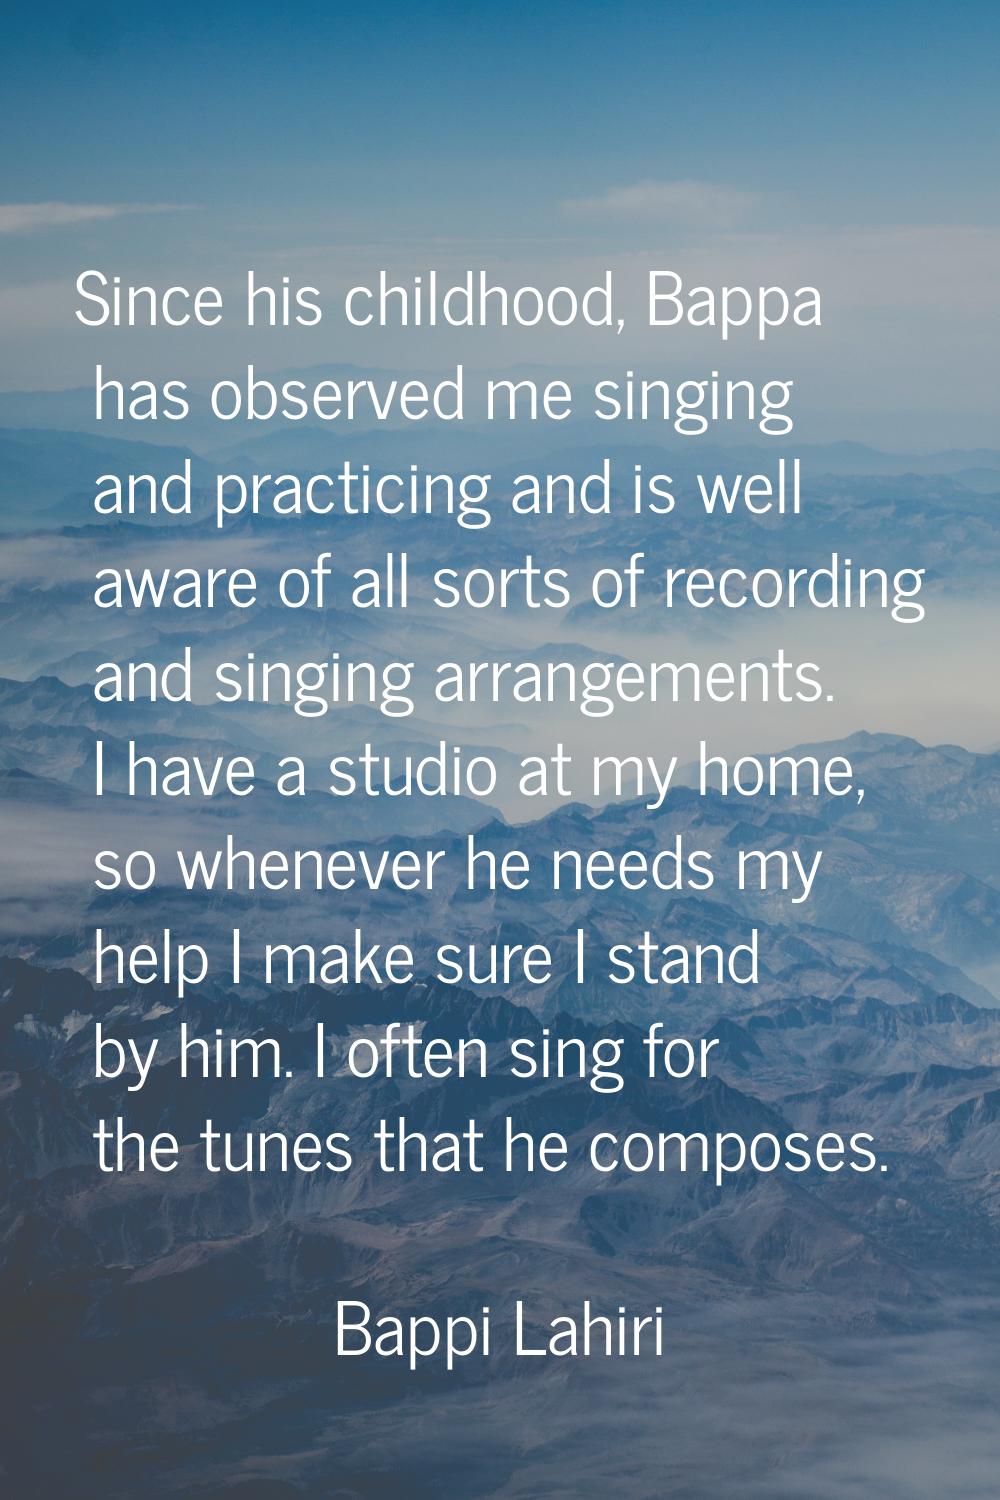 Since his childhood, Bappa has observed me singing and practicing and is well aware of all sorts of